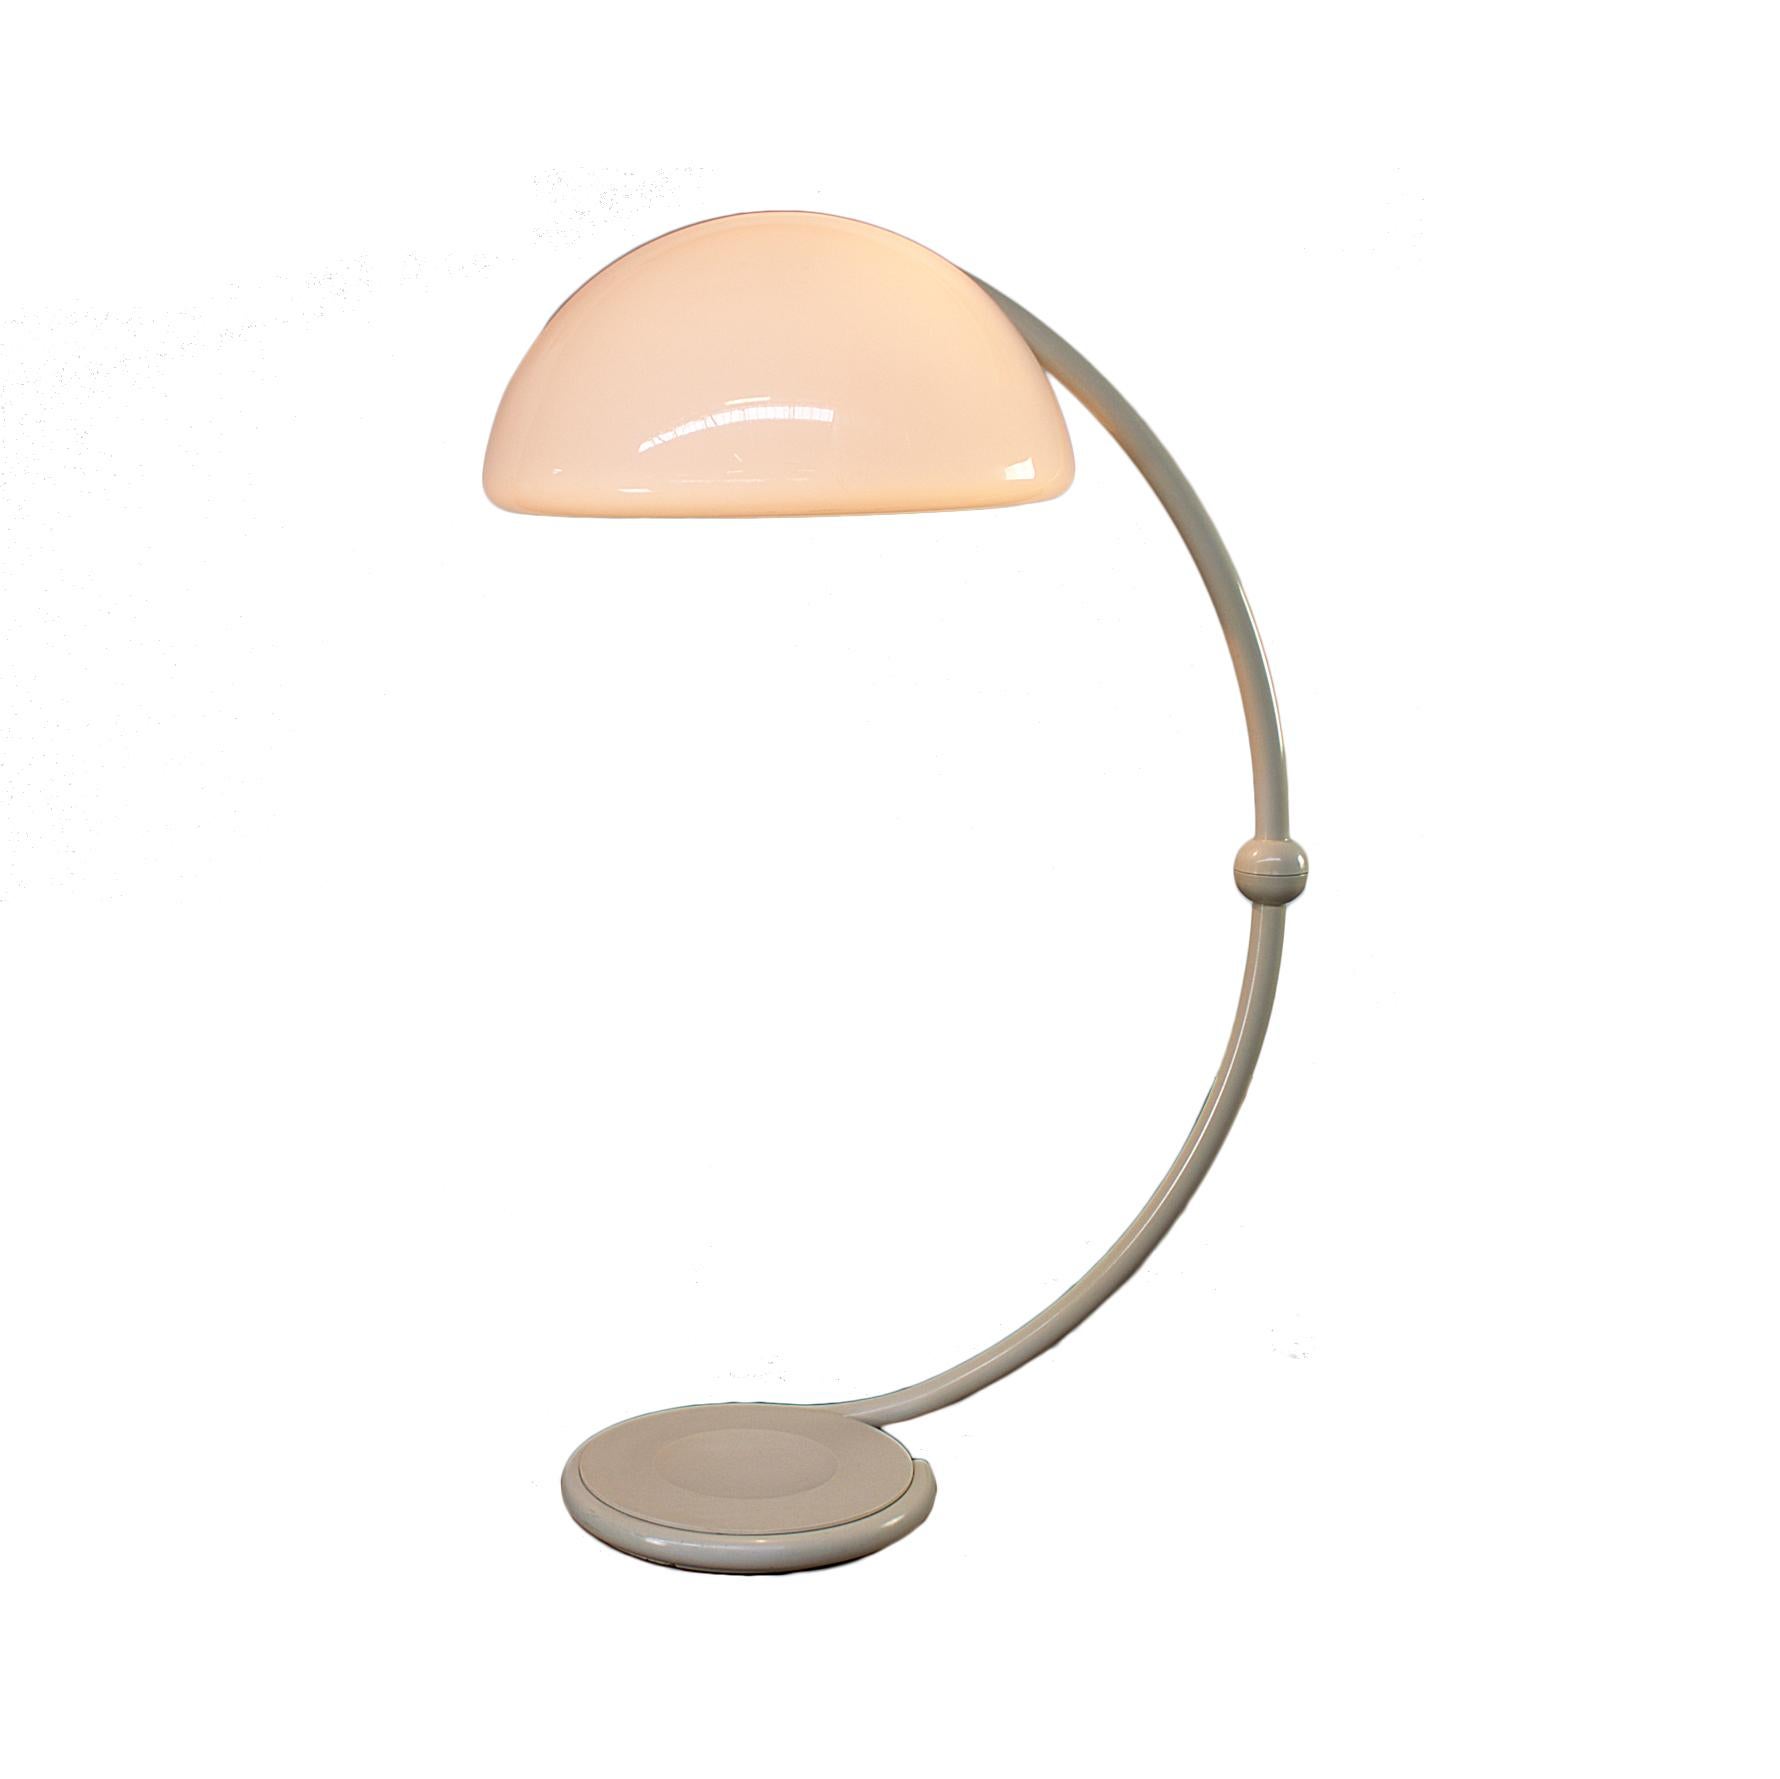 Floor lamp, diffused light, swing arm, white opal methacrylate diffuser, metal frame in white color. This floorlamp can rotate 360 degrees.

Signed by Martinelli Luce on bottom.

Designed in 1965 by Elio Martinelli, the lamp is made of